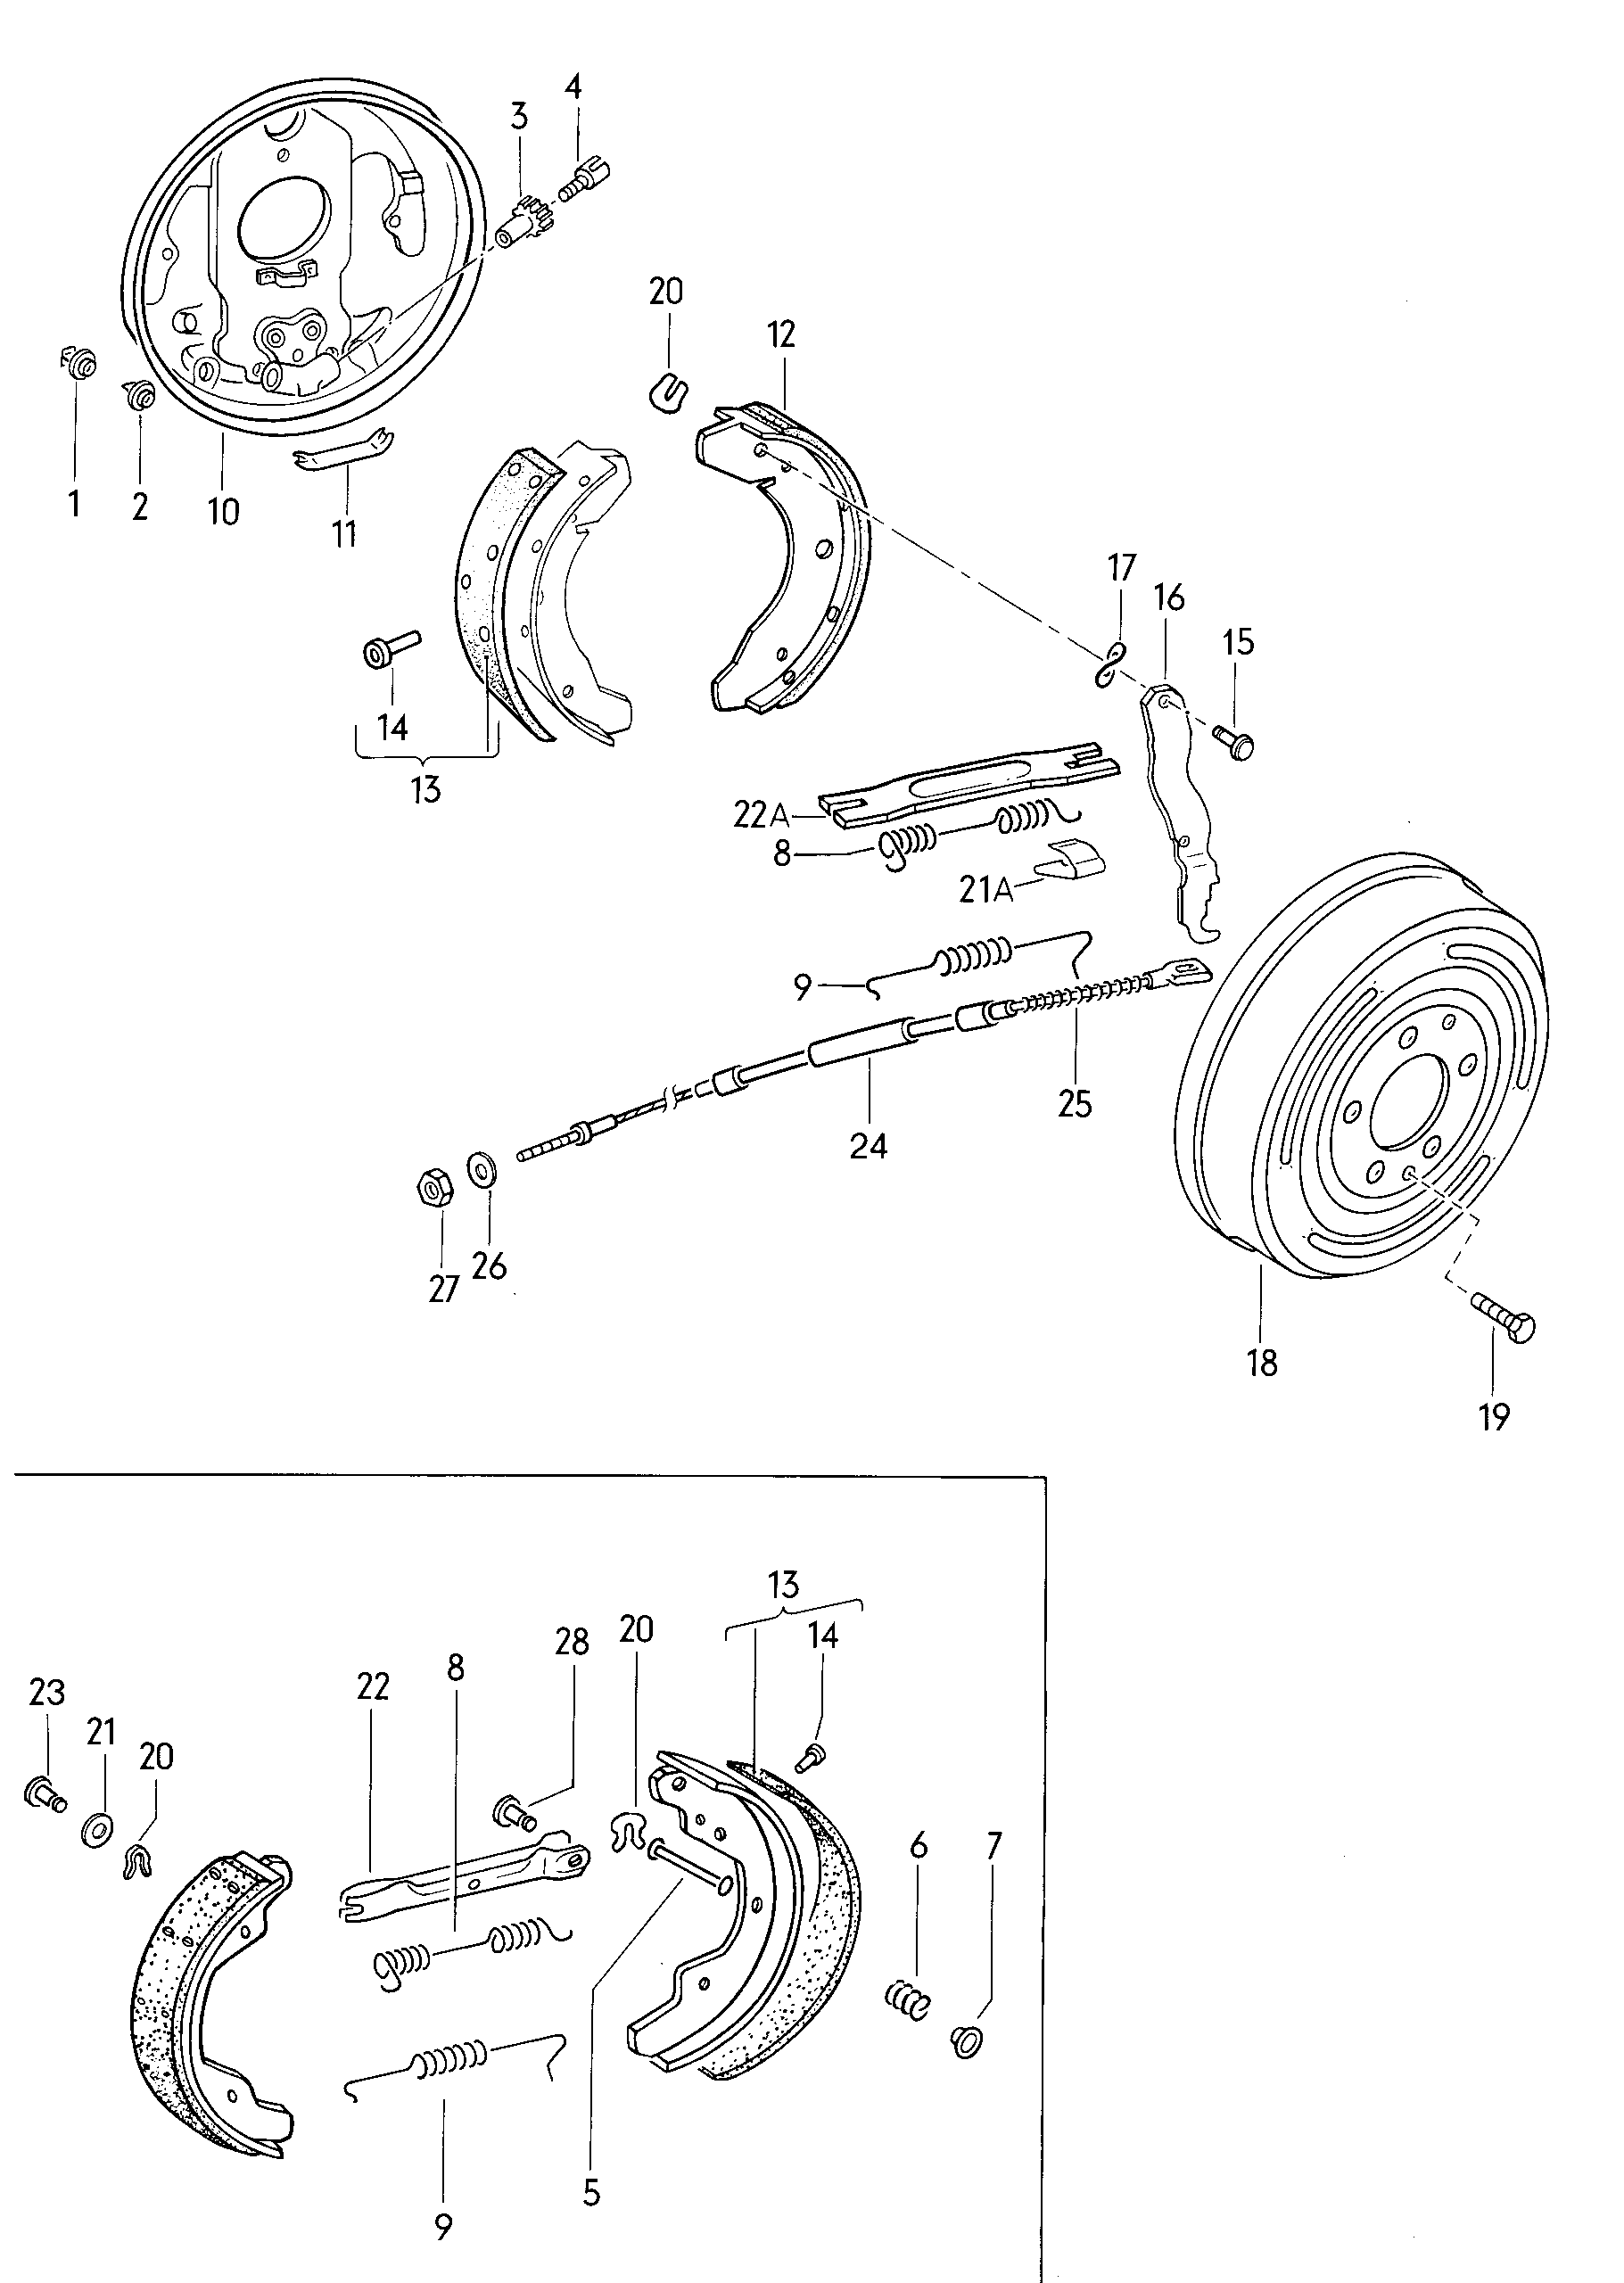 calliper carrierbrake shoe with liningbrake cable rear - Type 2 - t2